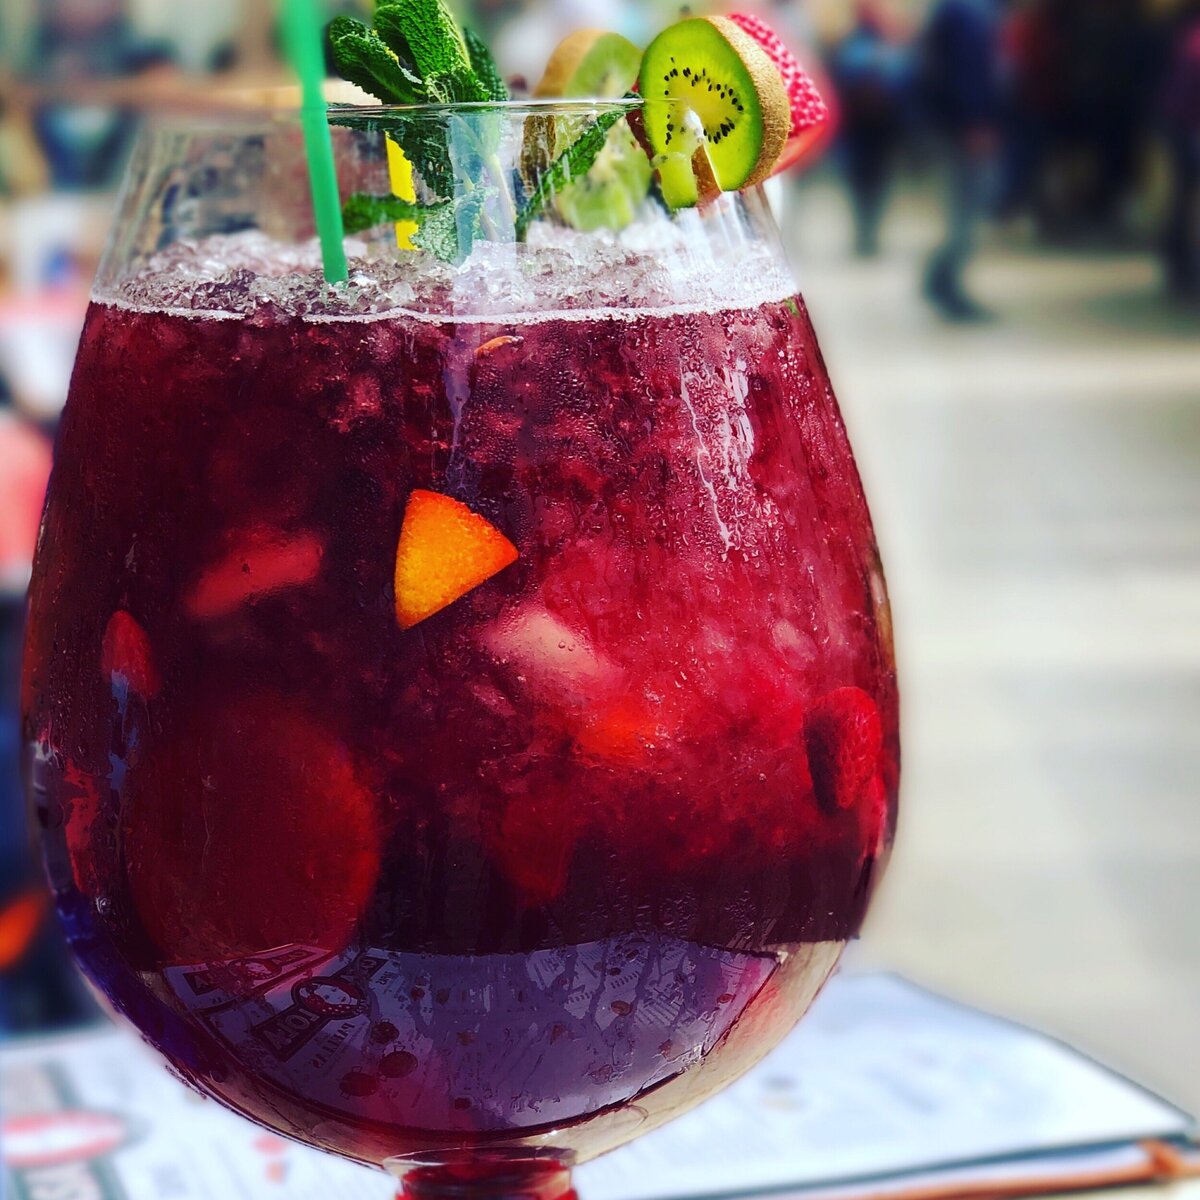 sangria is a great drink for a party